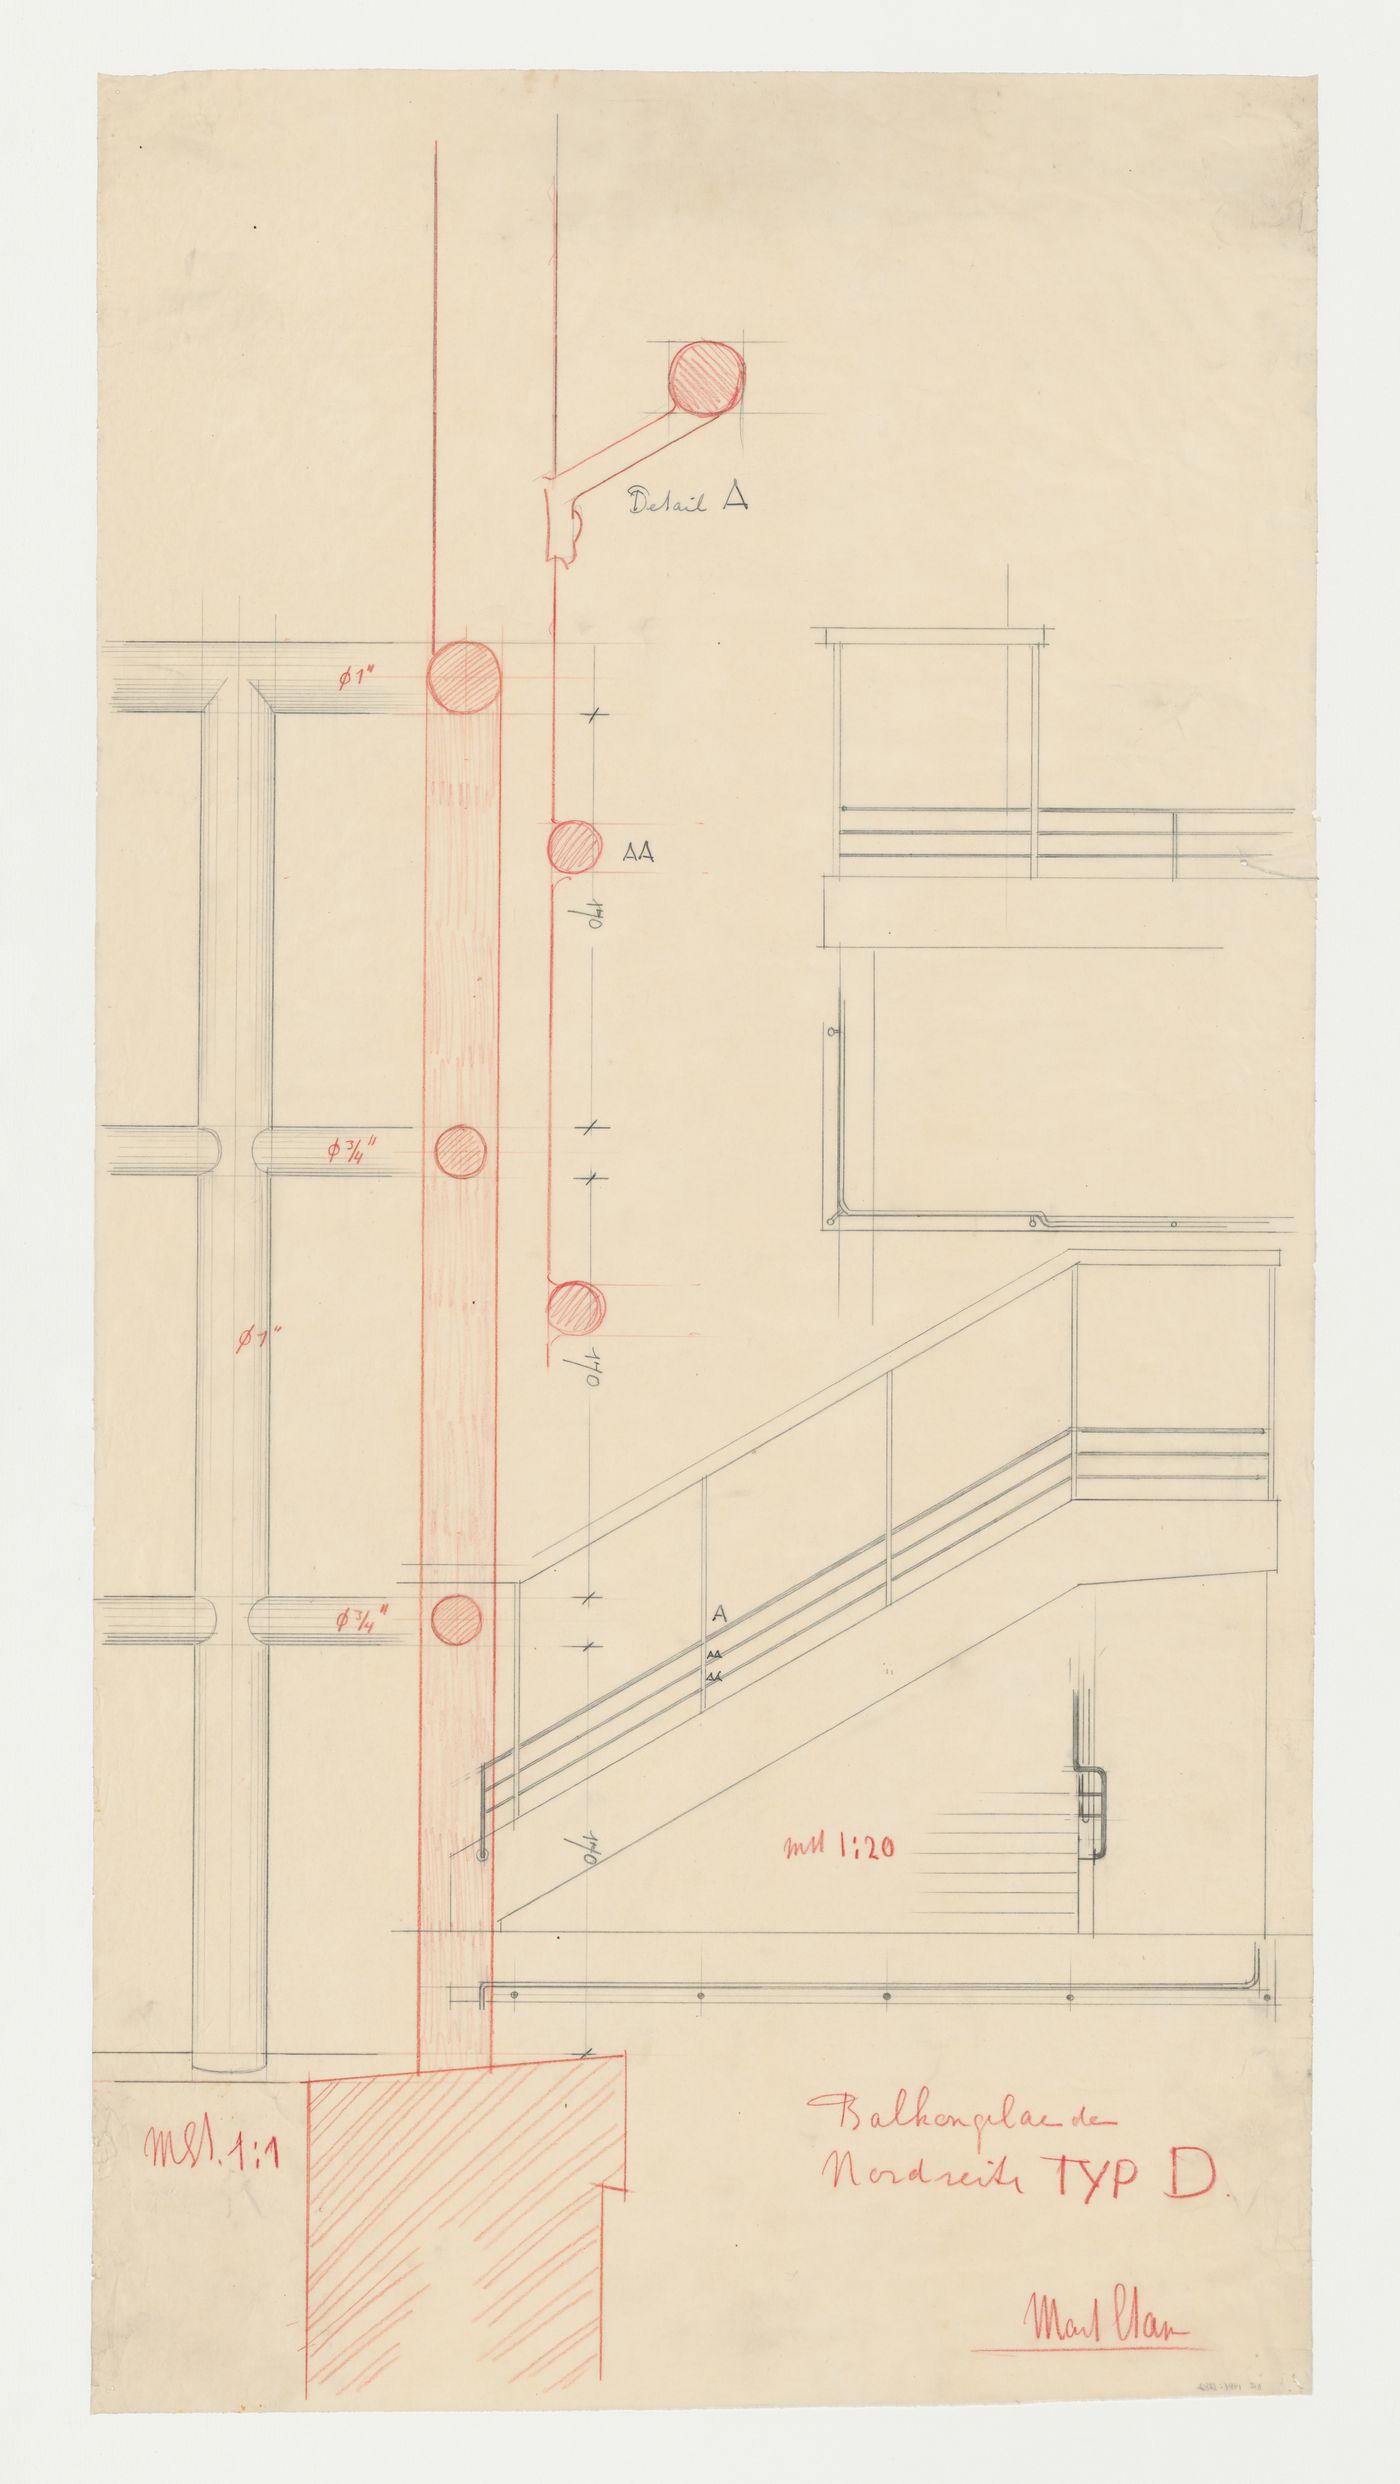 Elevation and sectional details for a balcony railing for the north side of a type D housing unit, Hellerhof Housing Estate, Frankfurt am Main, Germany